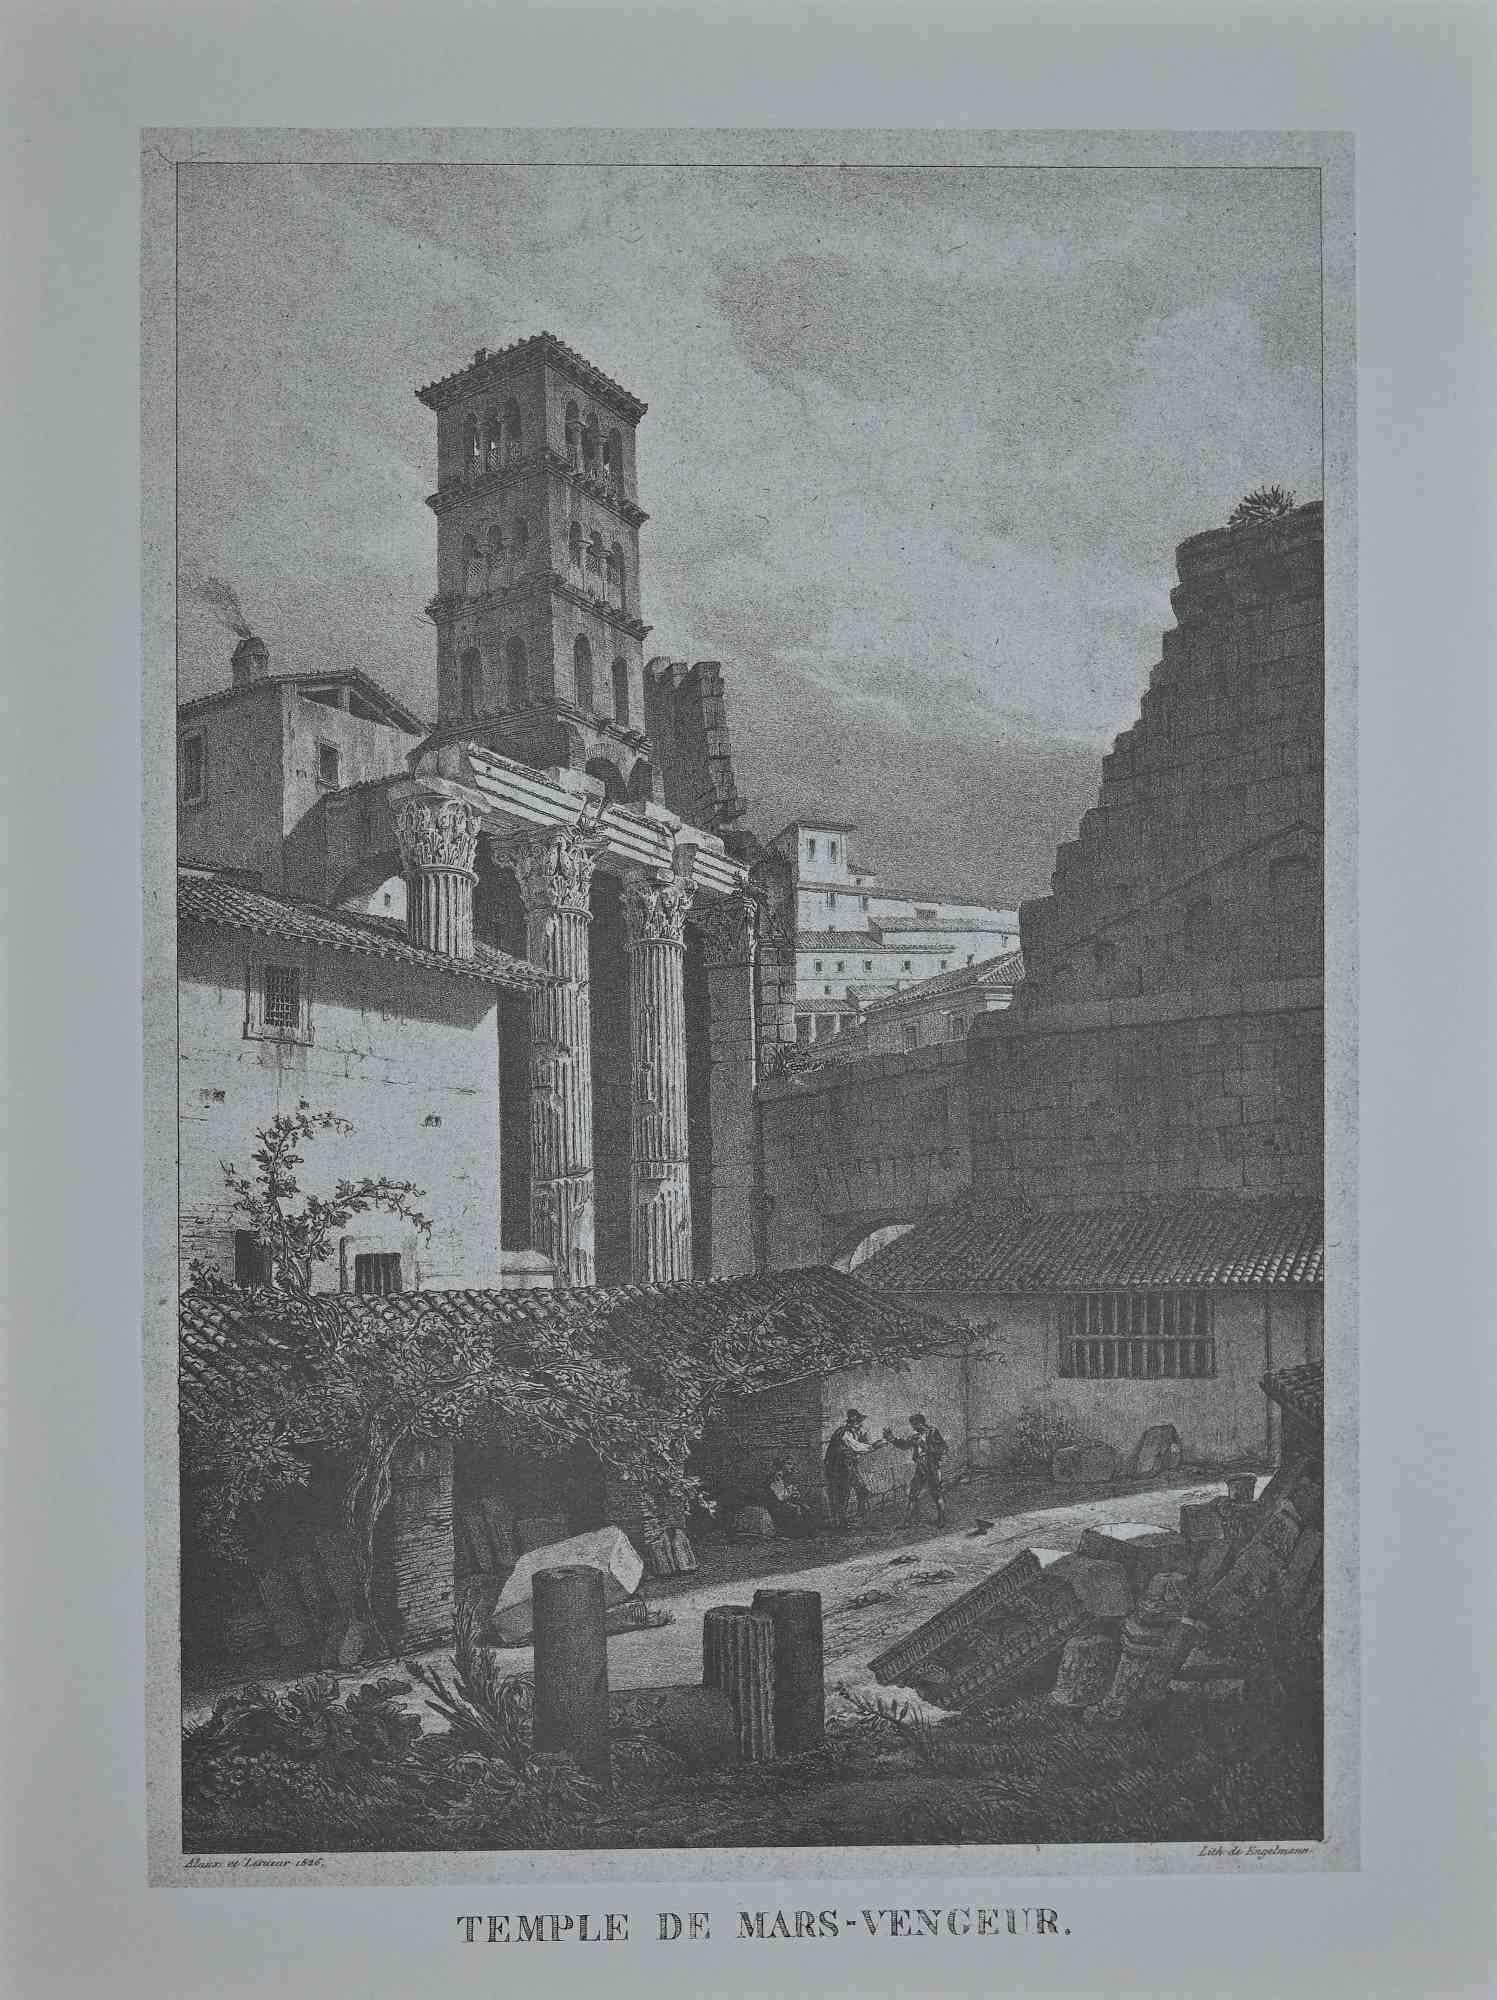 Roman Temples is a set of 6 vintage offset printson paper, realized after G. Engelmann (1788-1839) in the late 20th century.

The artworks are signed on the plate. In very good condition.